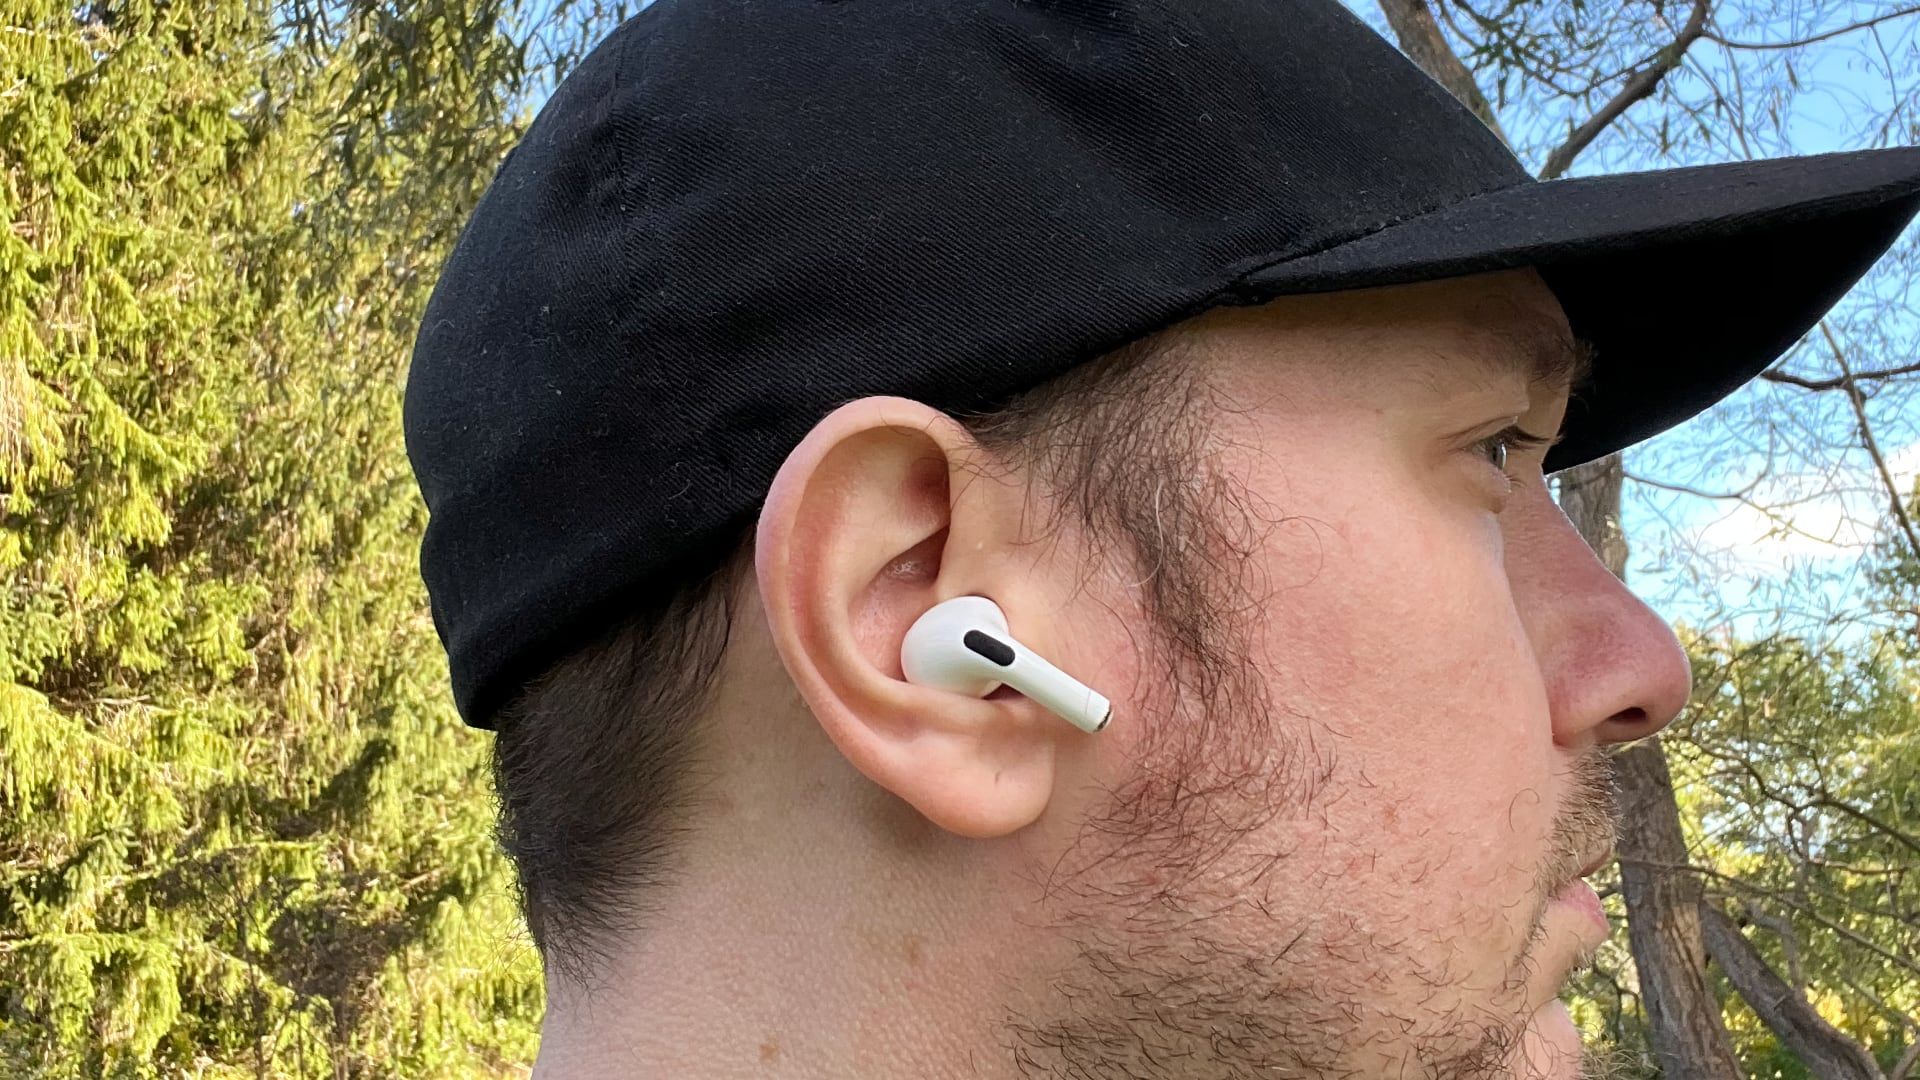 Wearing the 2nd-generation AirPods Pro 2